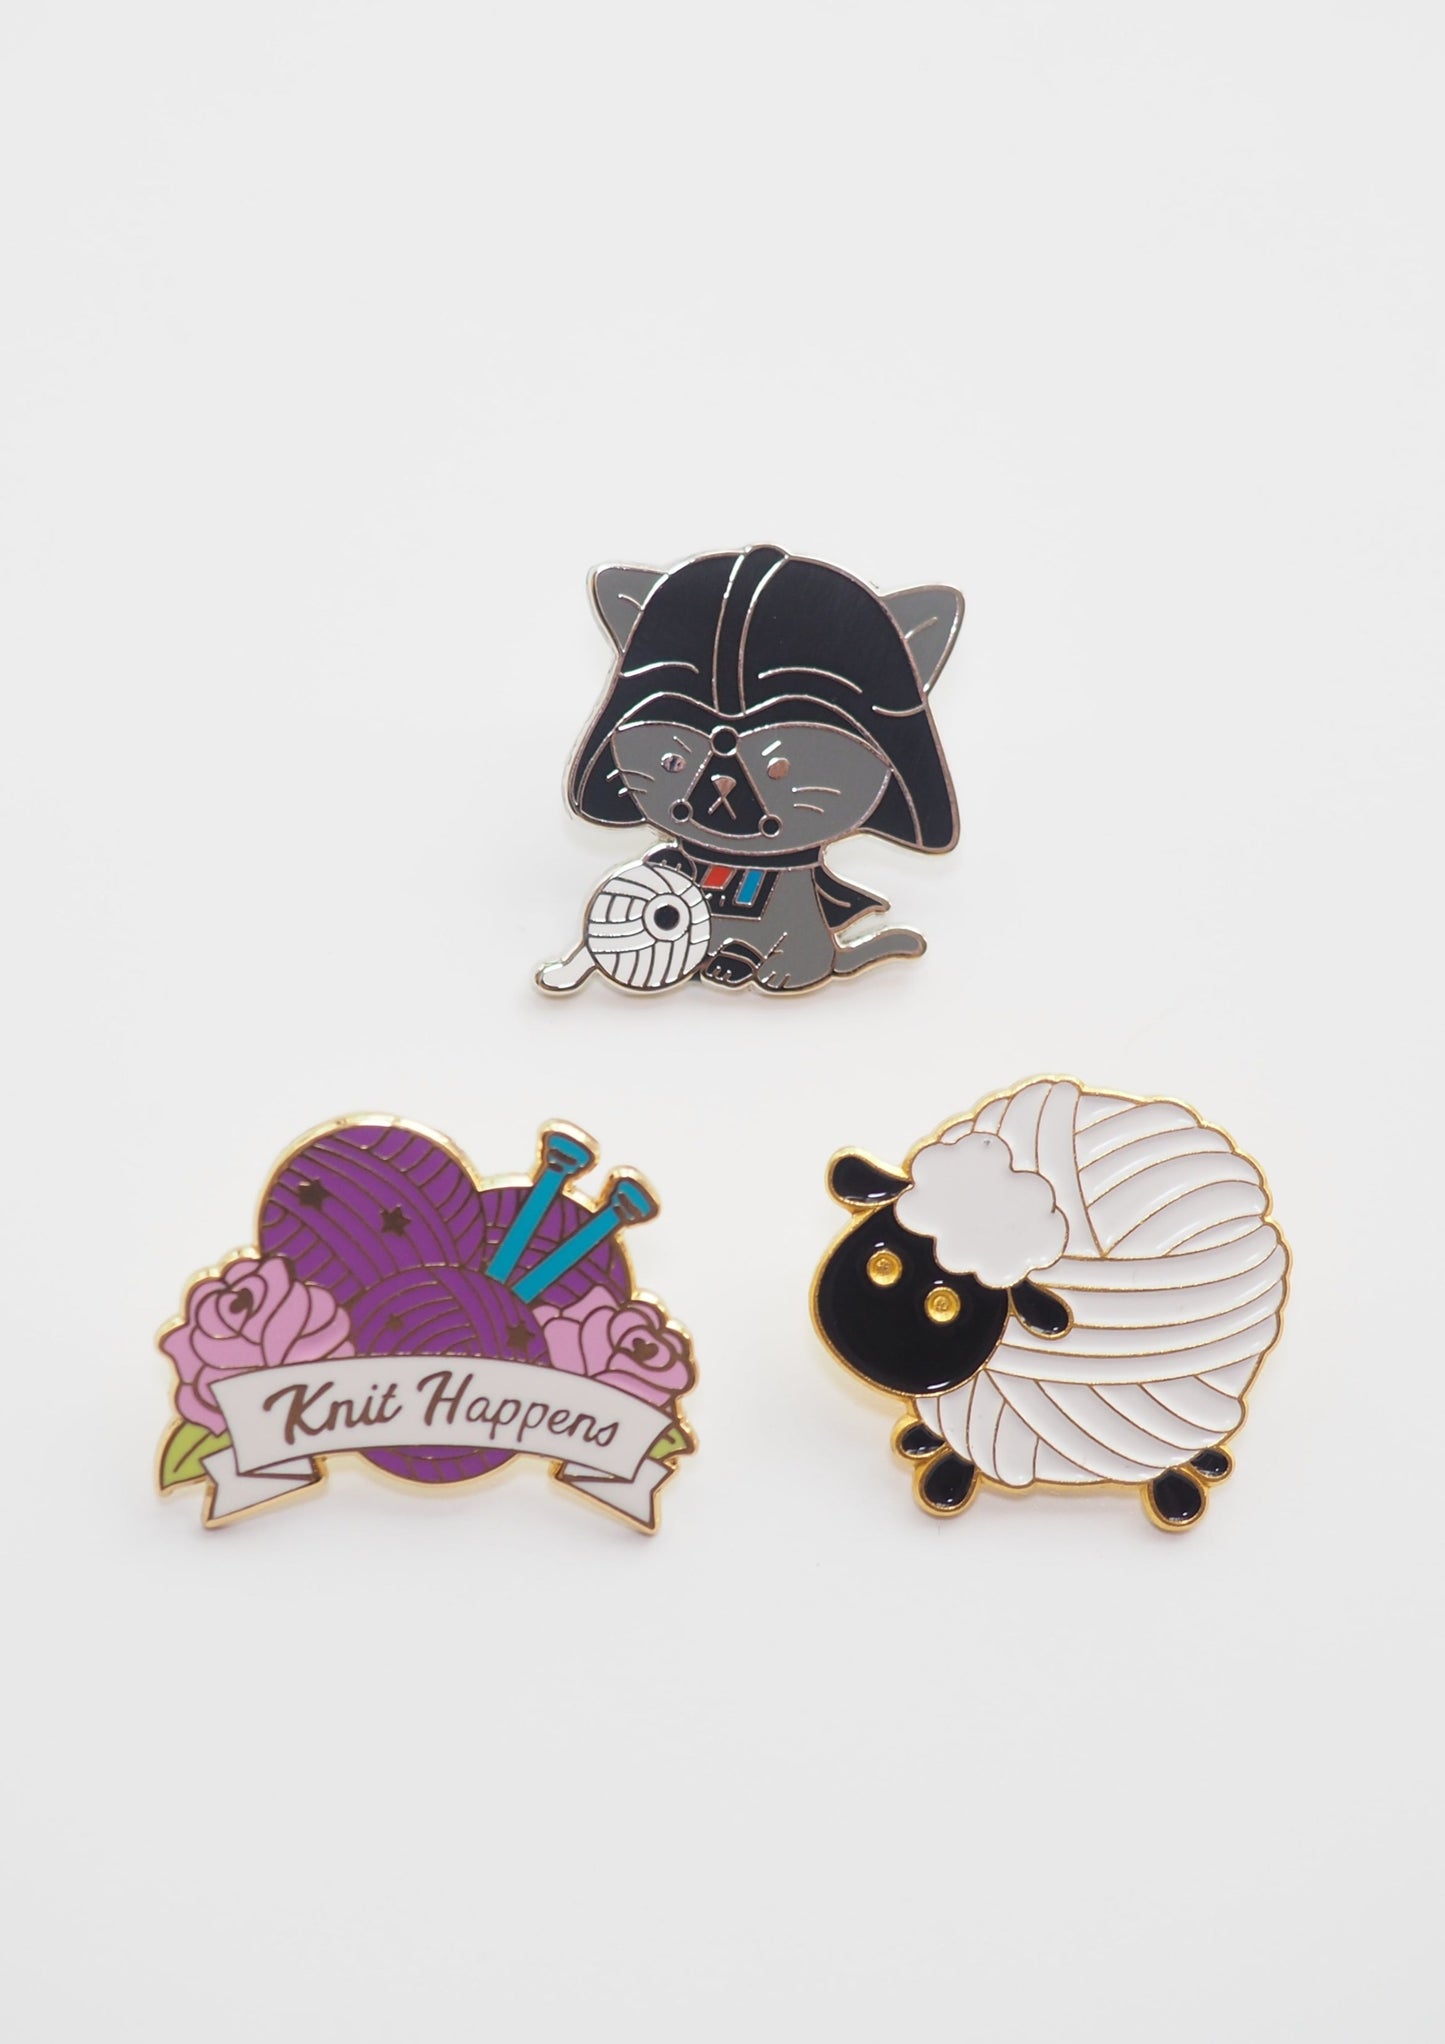 image of three enamel pins, one is a cat in a darth vader costume playing with yarn that looks like the death star, the second is purple balls of yarn with the words "knit happens", and the third is an adorable white sheep with a black face